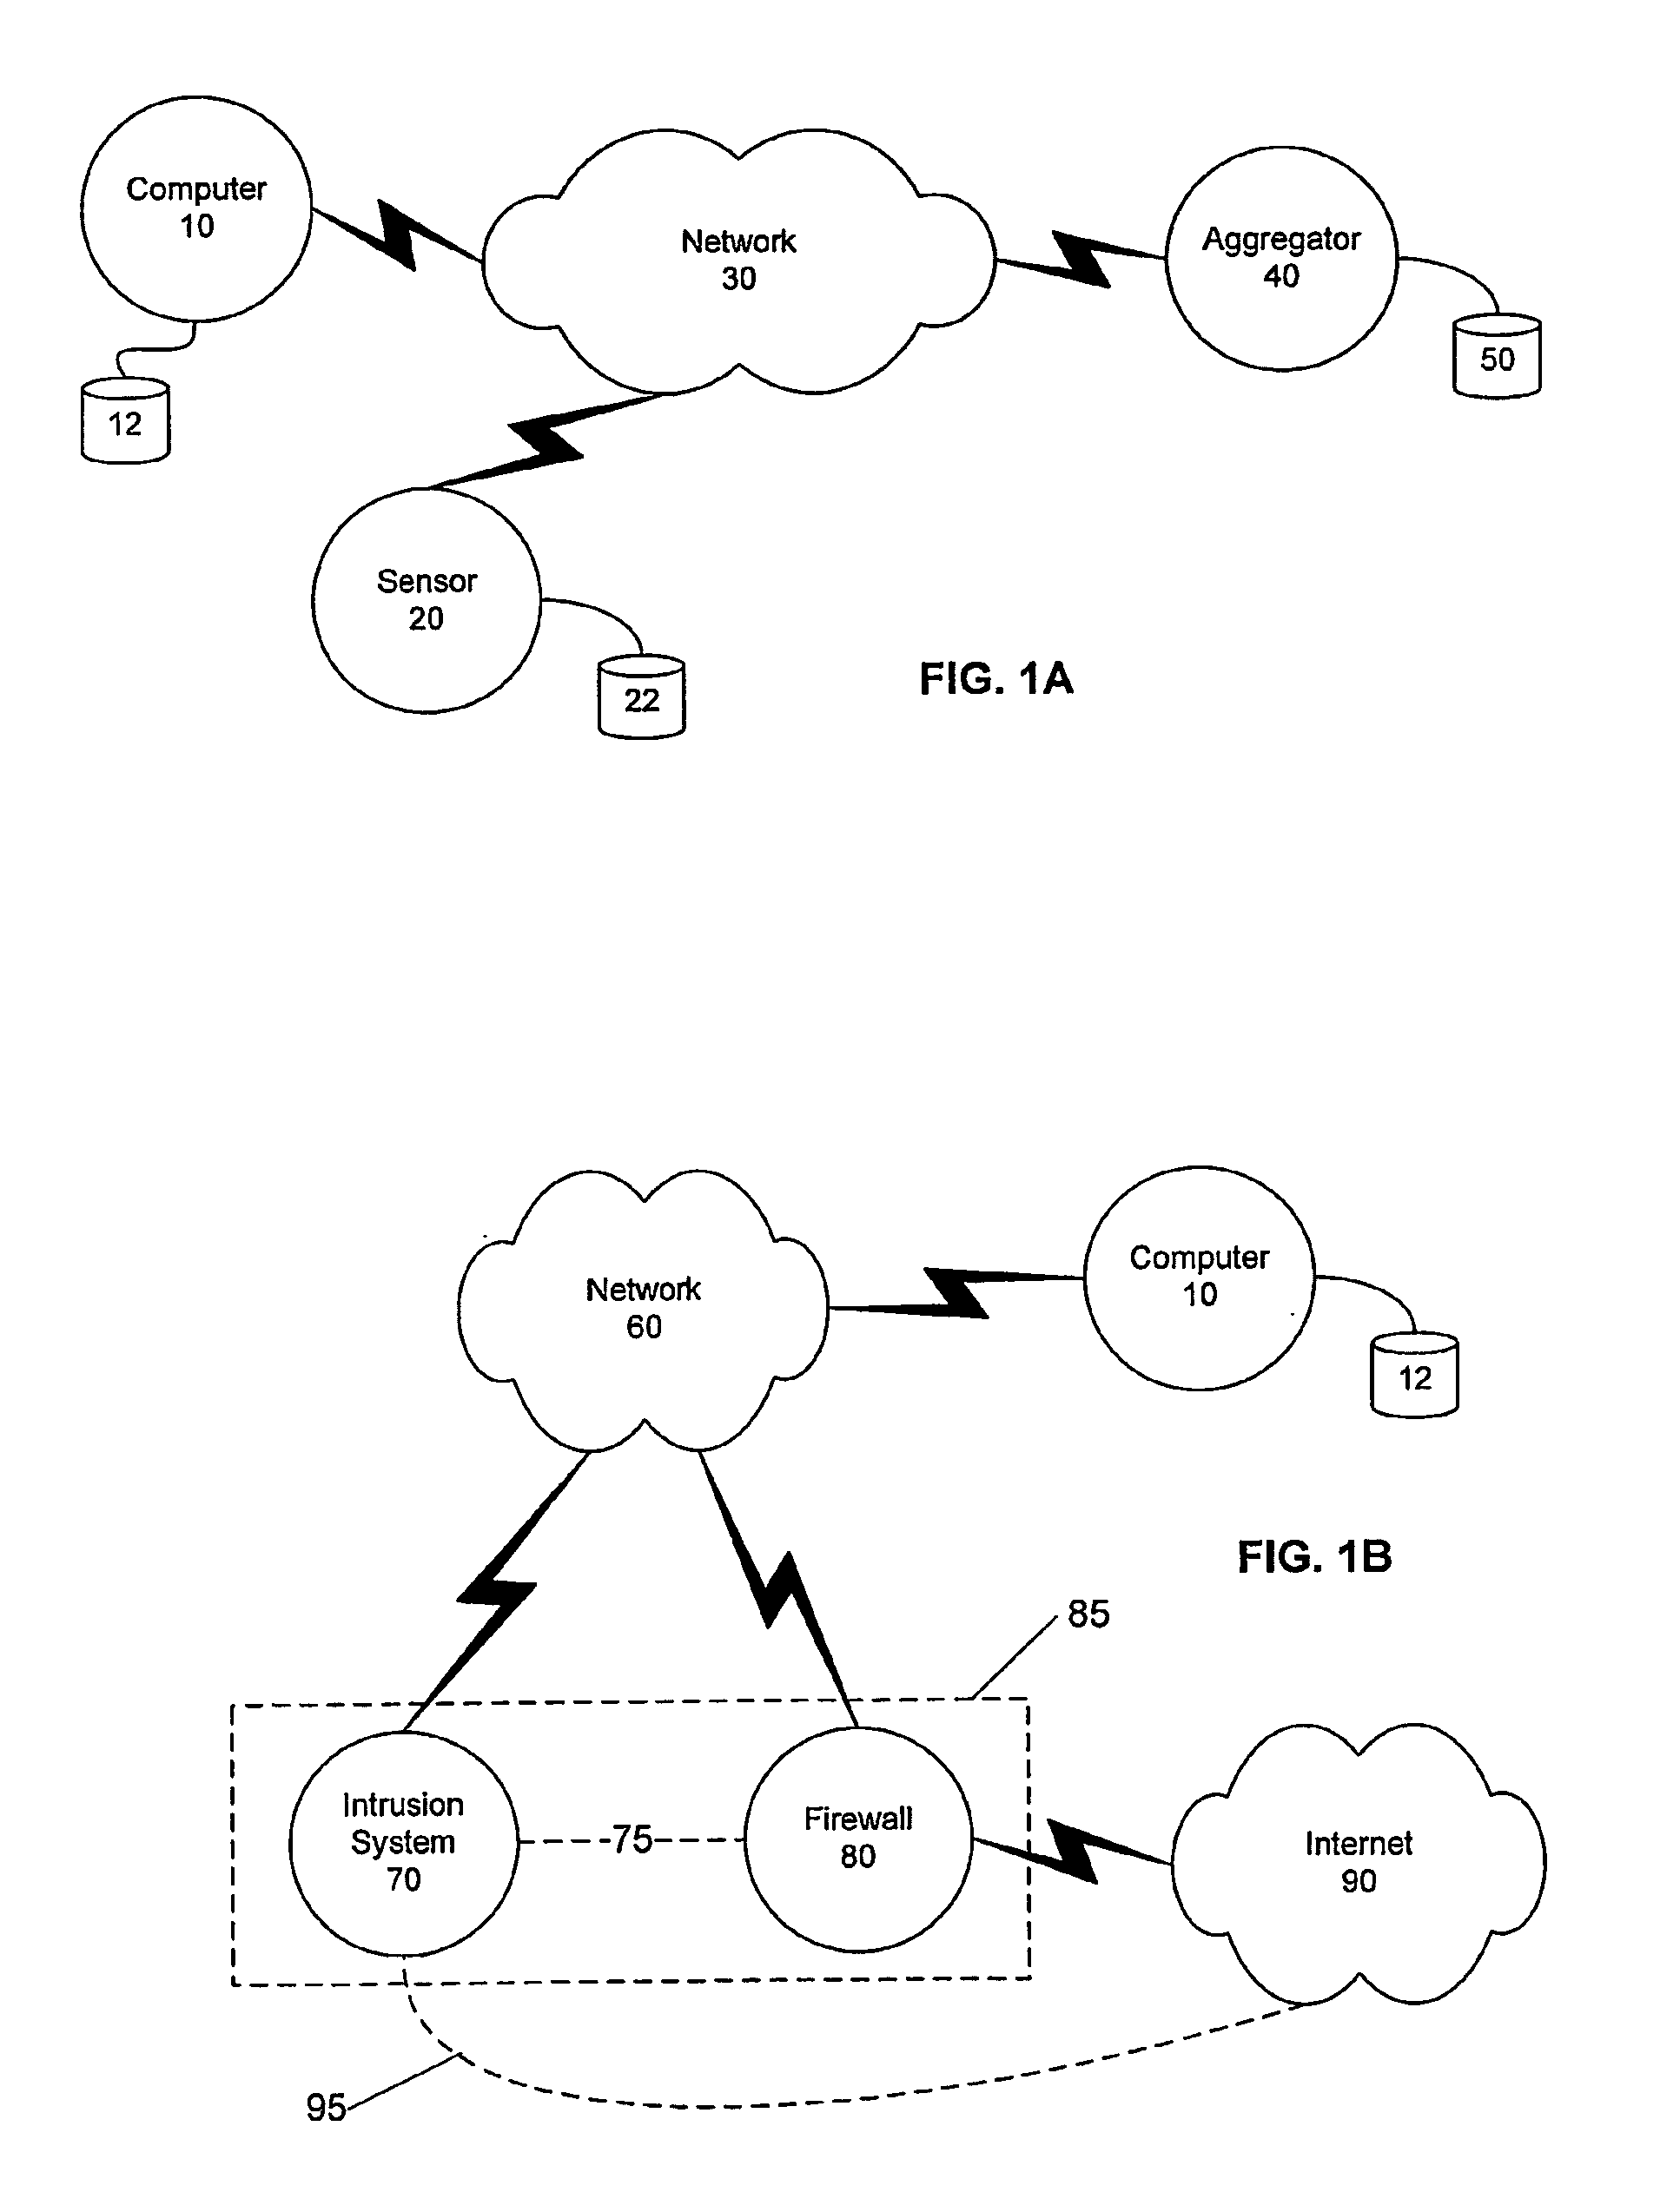 Detecting Public Network Attacks Using Signatures and Fast Content Analysis